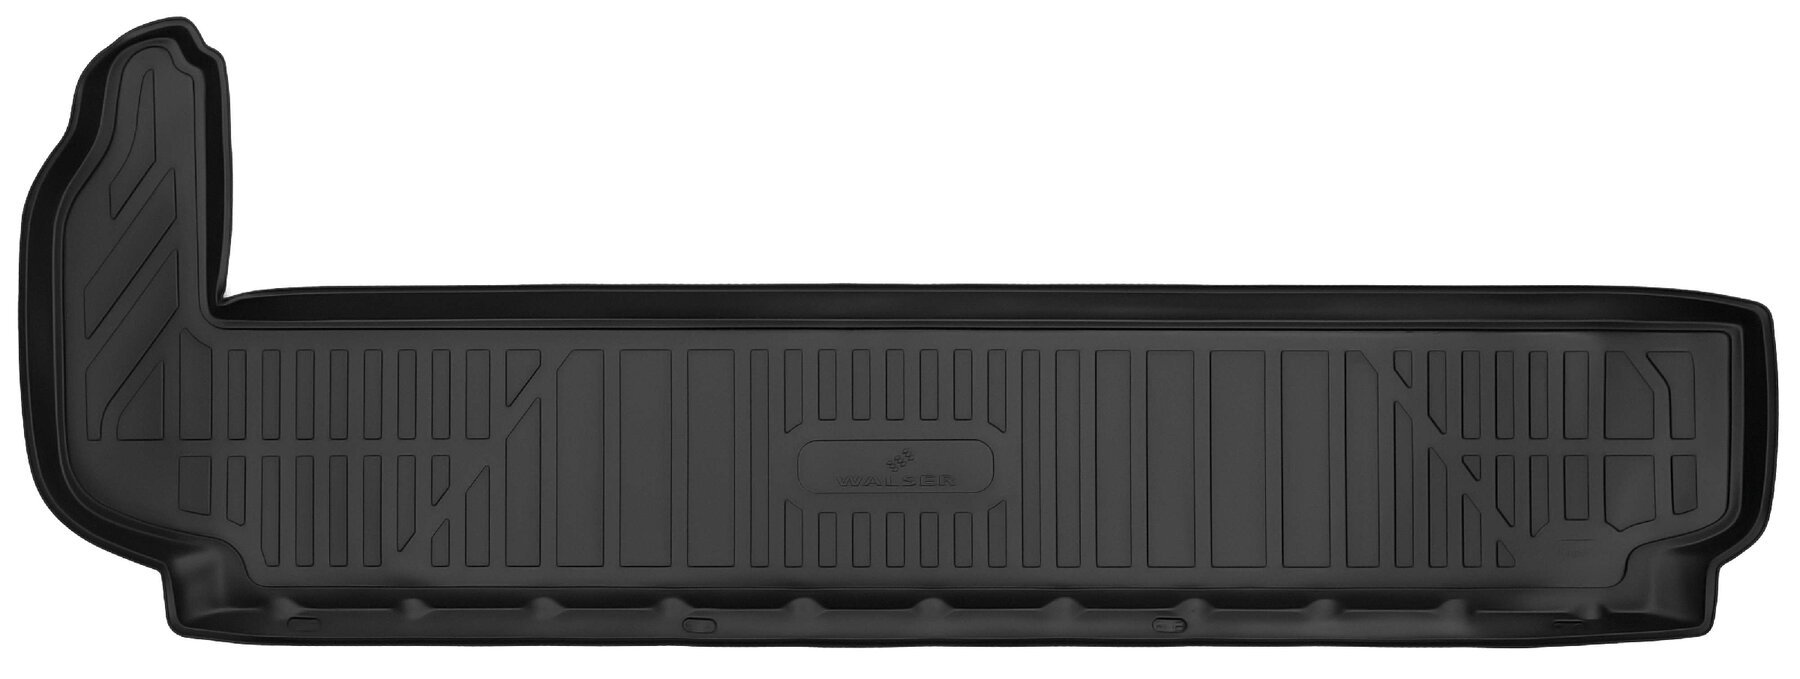 XTR Boot Mat for Toyota Land Cruiser (J15) 7 seats 3rd row upright Facelift 2013-Today